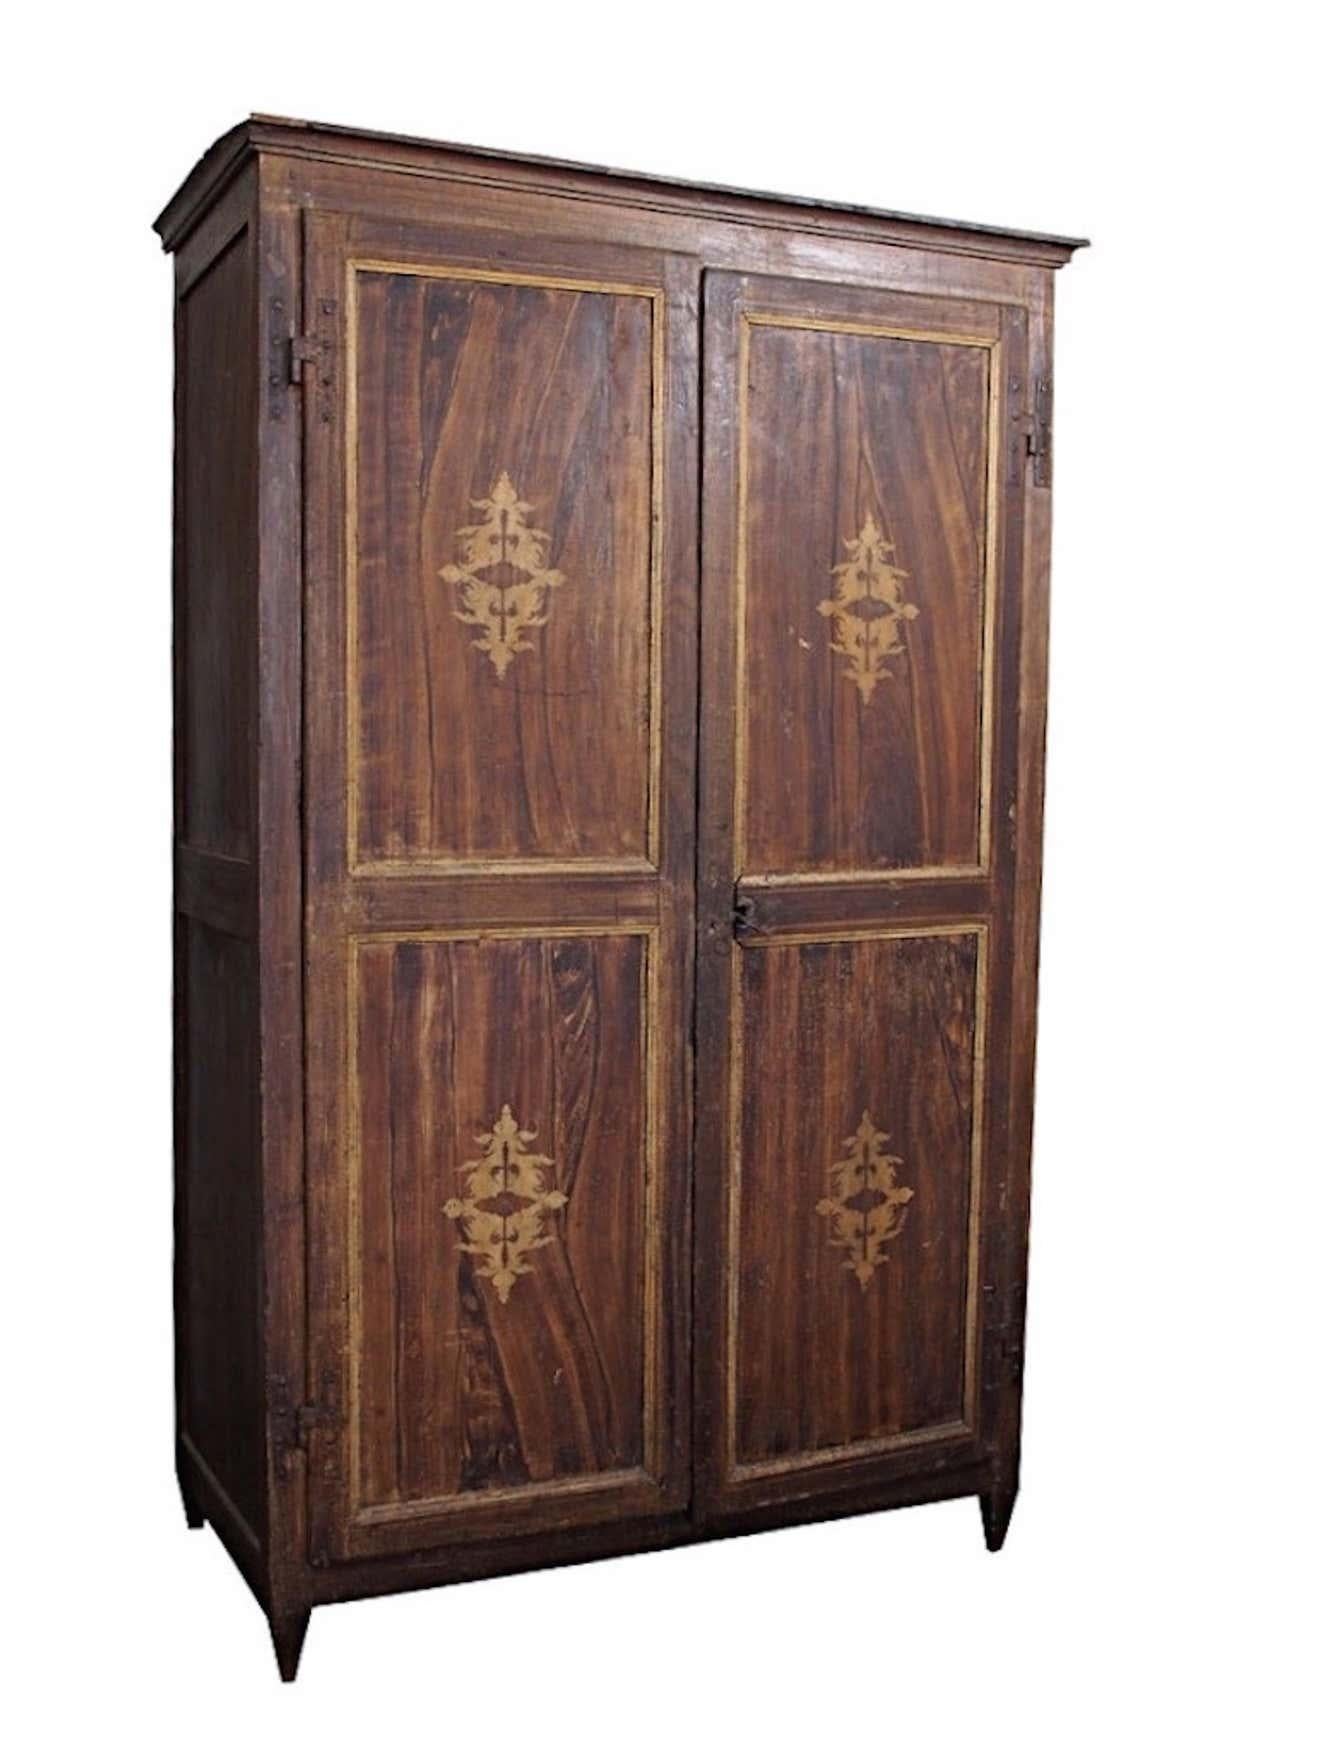 18th century Italian Louis XIV painted armoire two-door faux bois wardrobe with golden neoclassical decorative paint. With working lock and one key. As purchased in Italy with antique decorative interior paper. 

Wear consistent with age. Worn